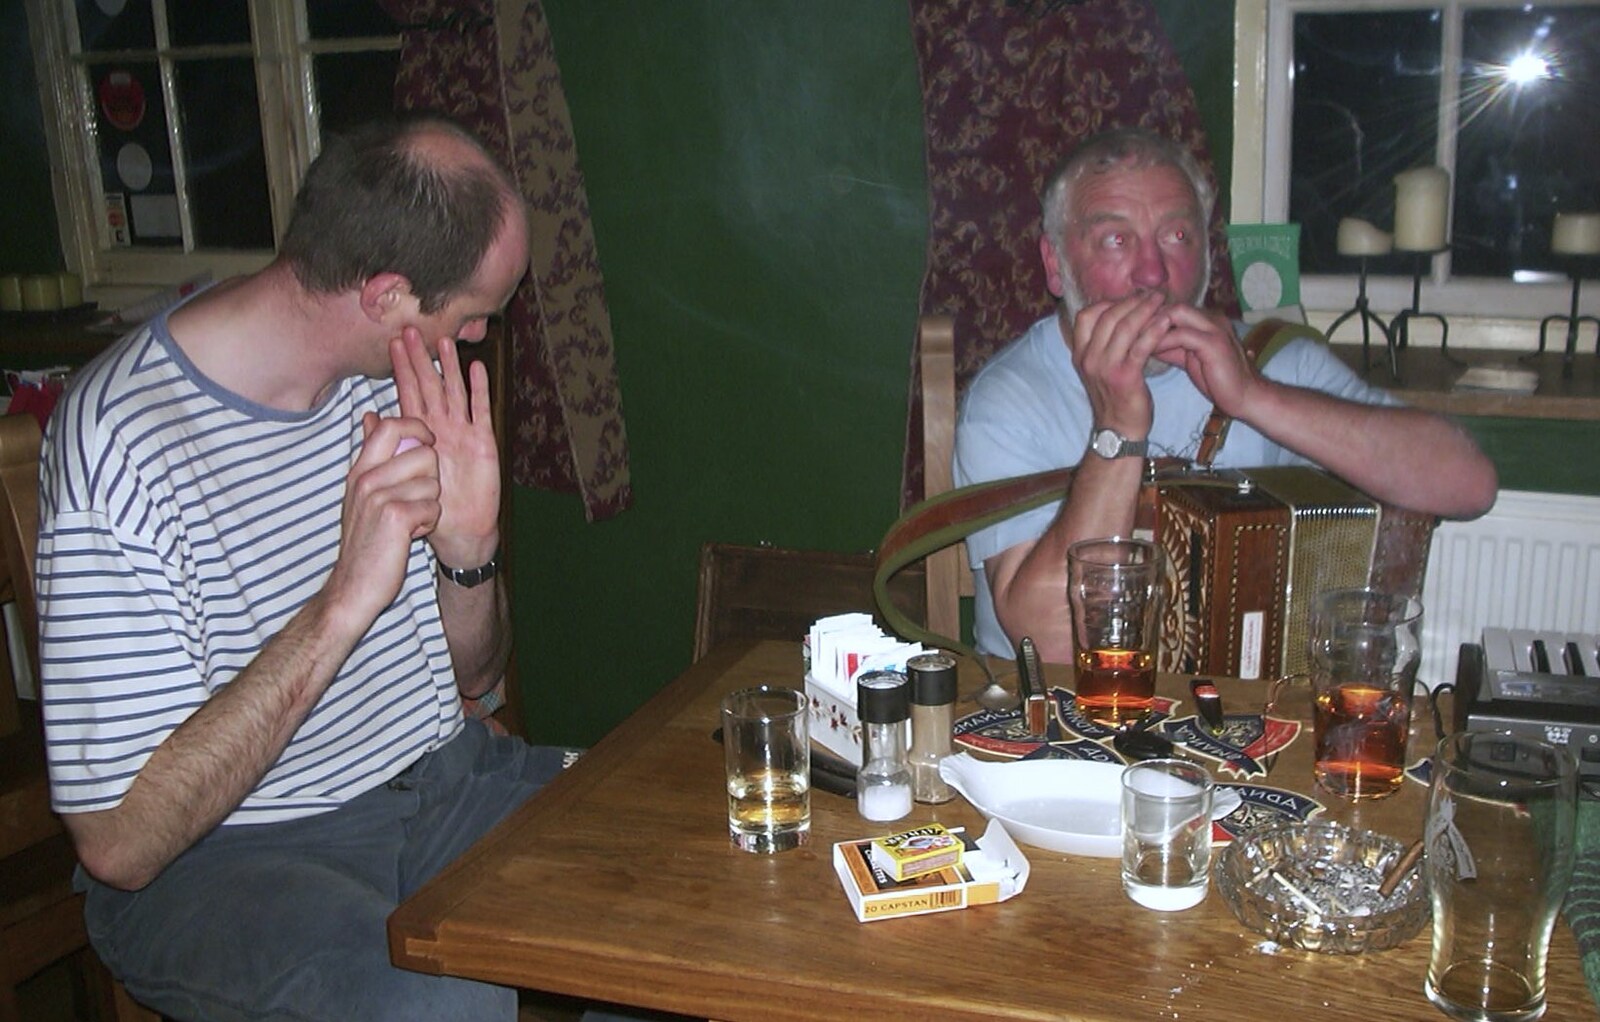 There's a harmonica moment from The BSCC at Laxfield and Hoxne, Suffolk - 2nd May 2002